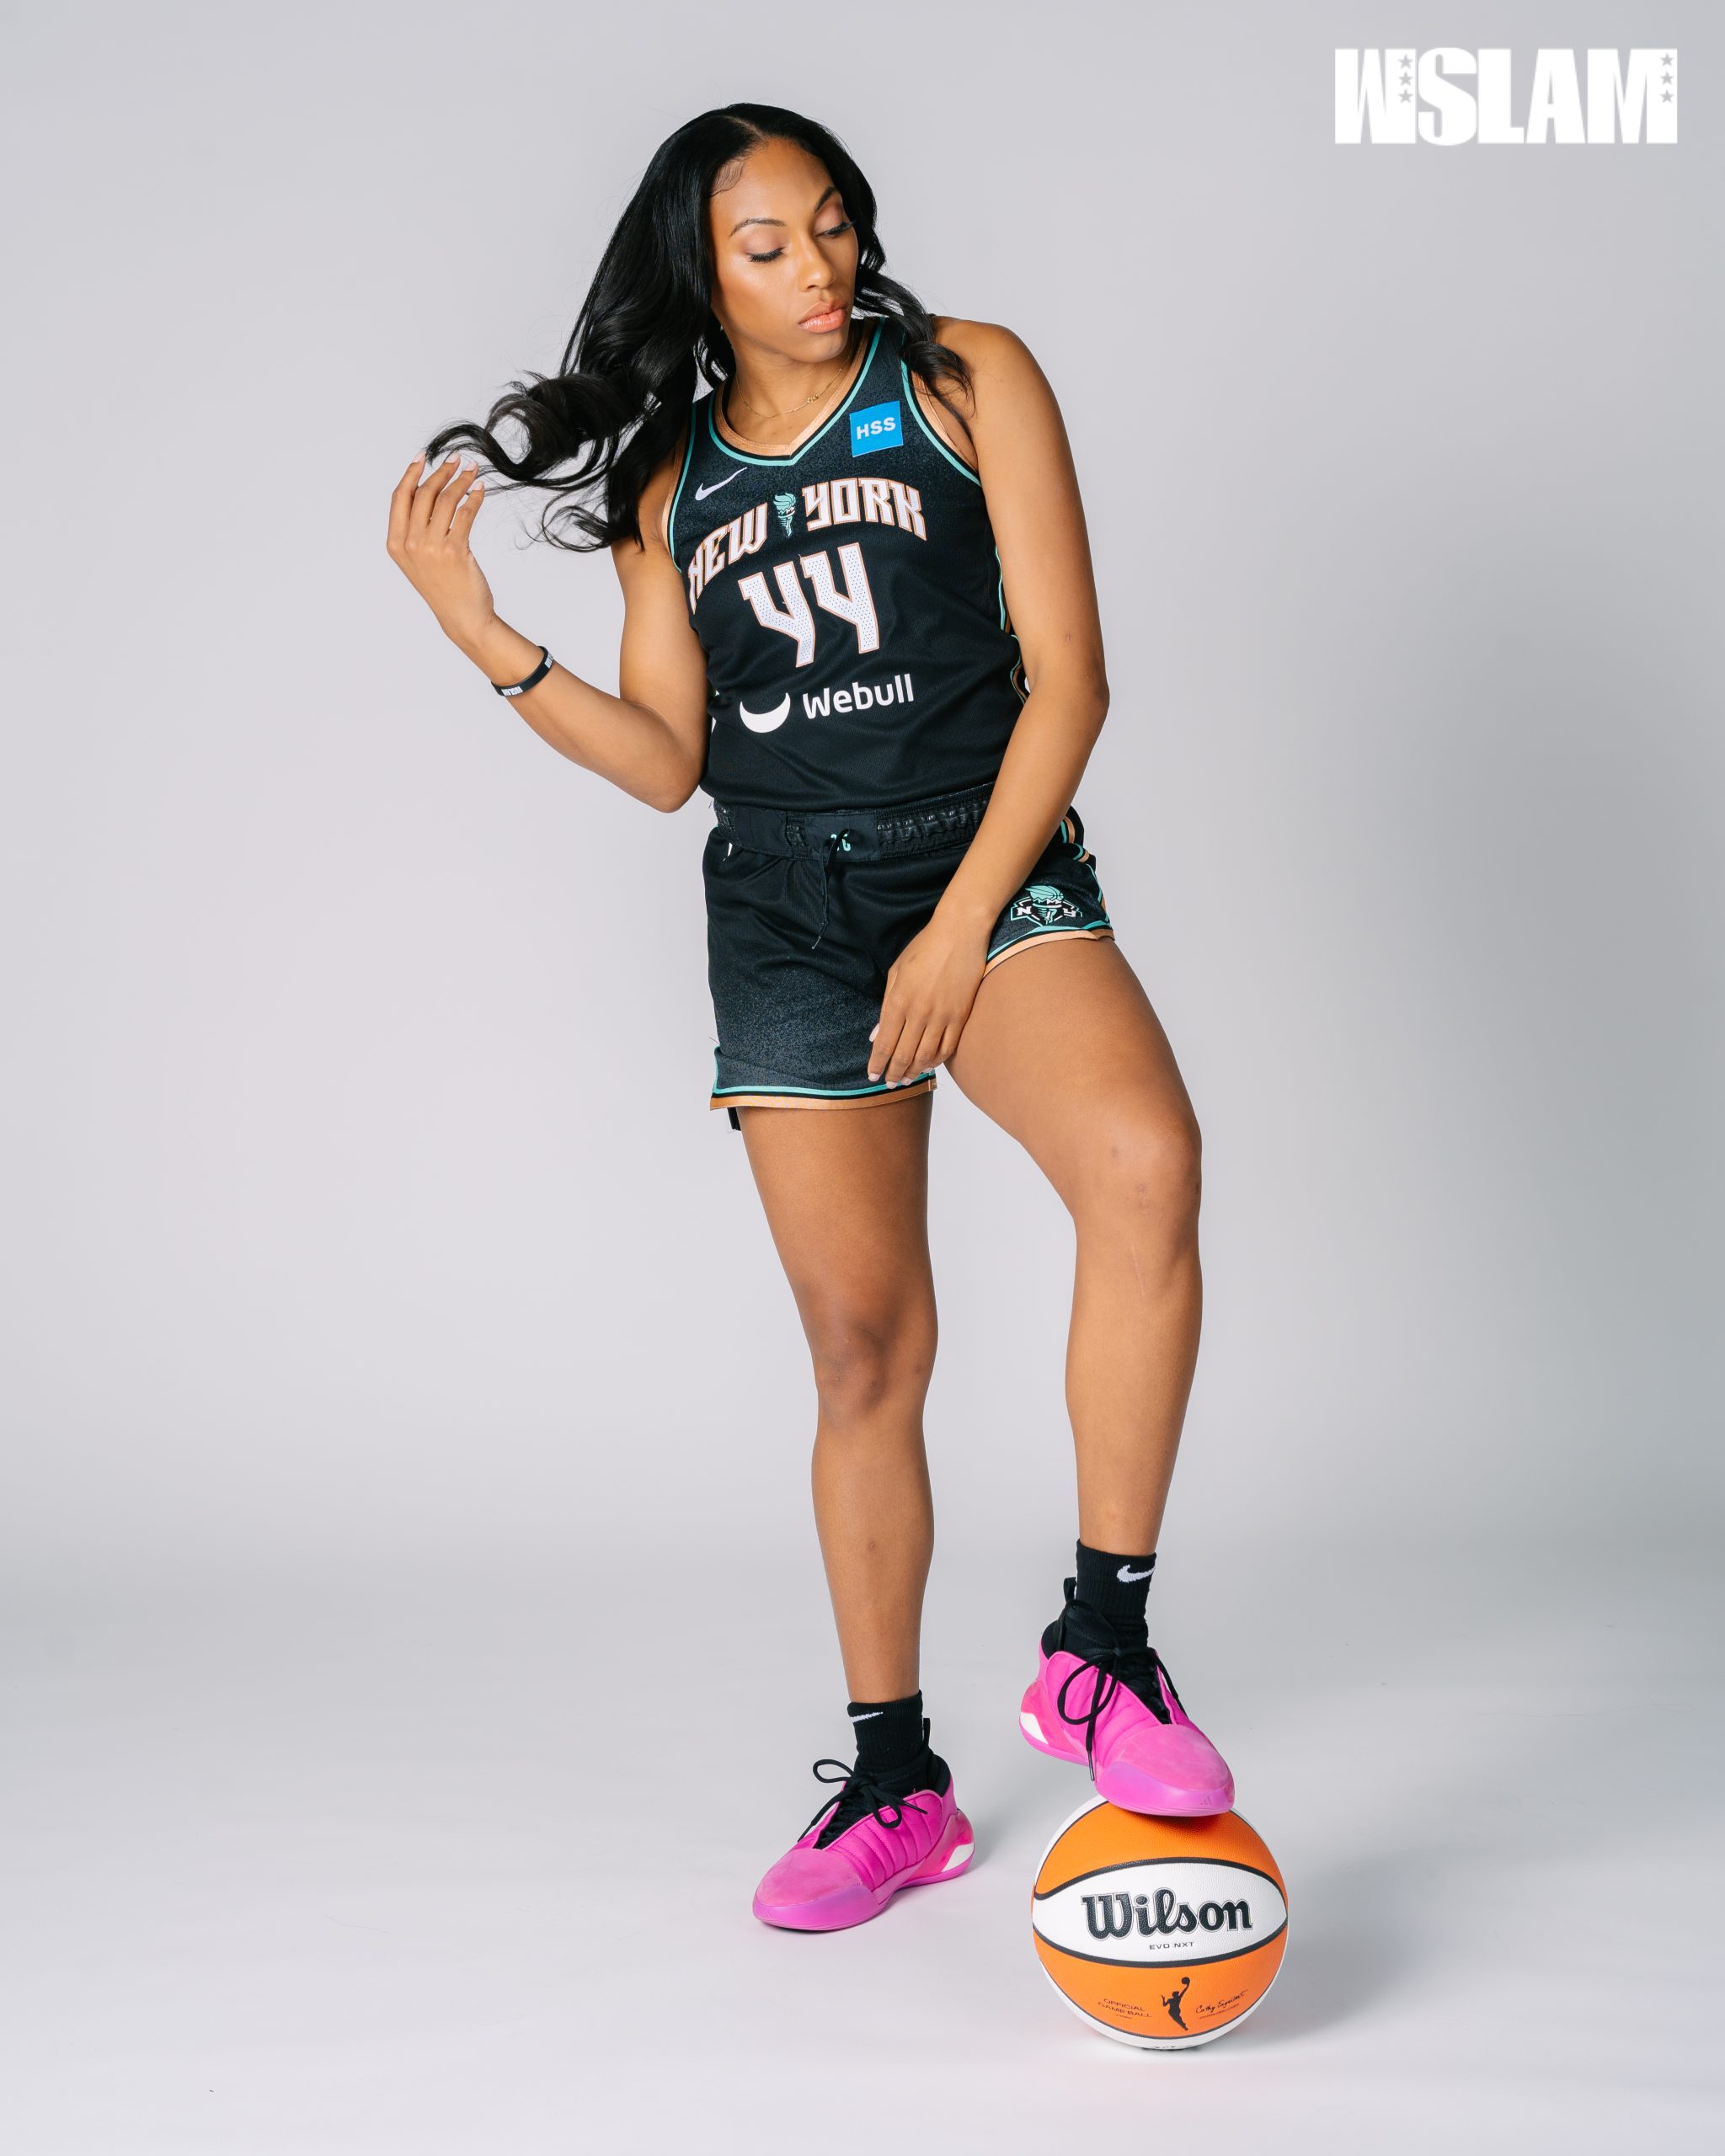 The Stars Align: Backstage Look at the New York Liberty SLAM Cover Shoot